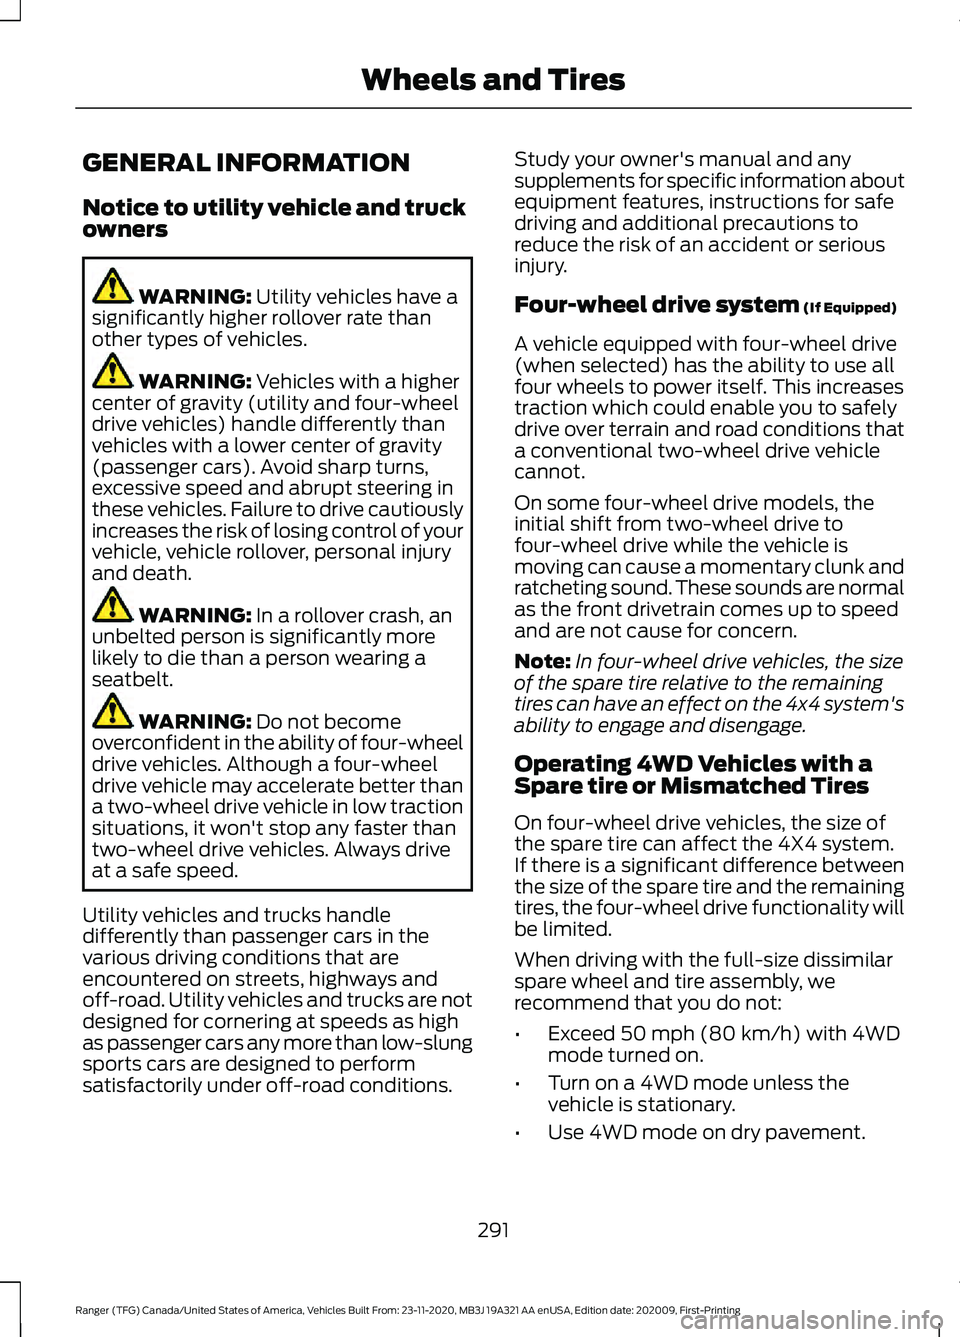 FORD RANGER 2021  Owners Manual GENERAL INFORMATION
Notice to utility vehicle and truck
owners
WARNING: Utility vehicles have a
significantly higher rollover rate than
other types of vehicles. WARNING: 
Vehicles with a higher
center